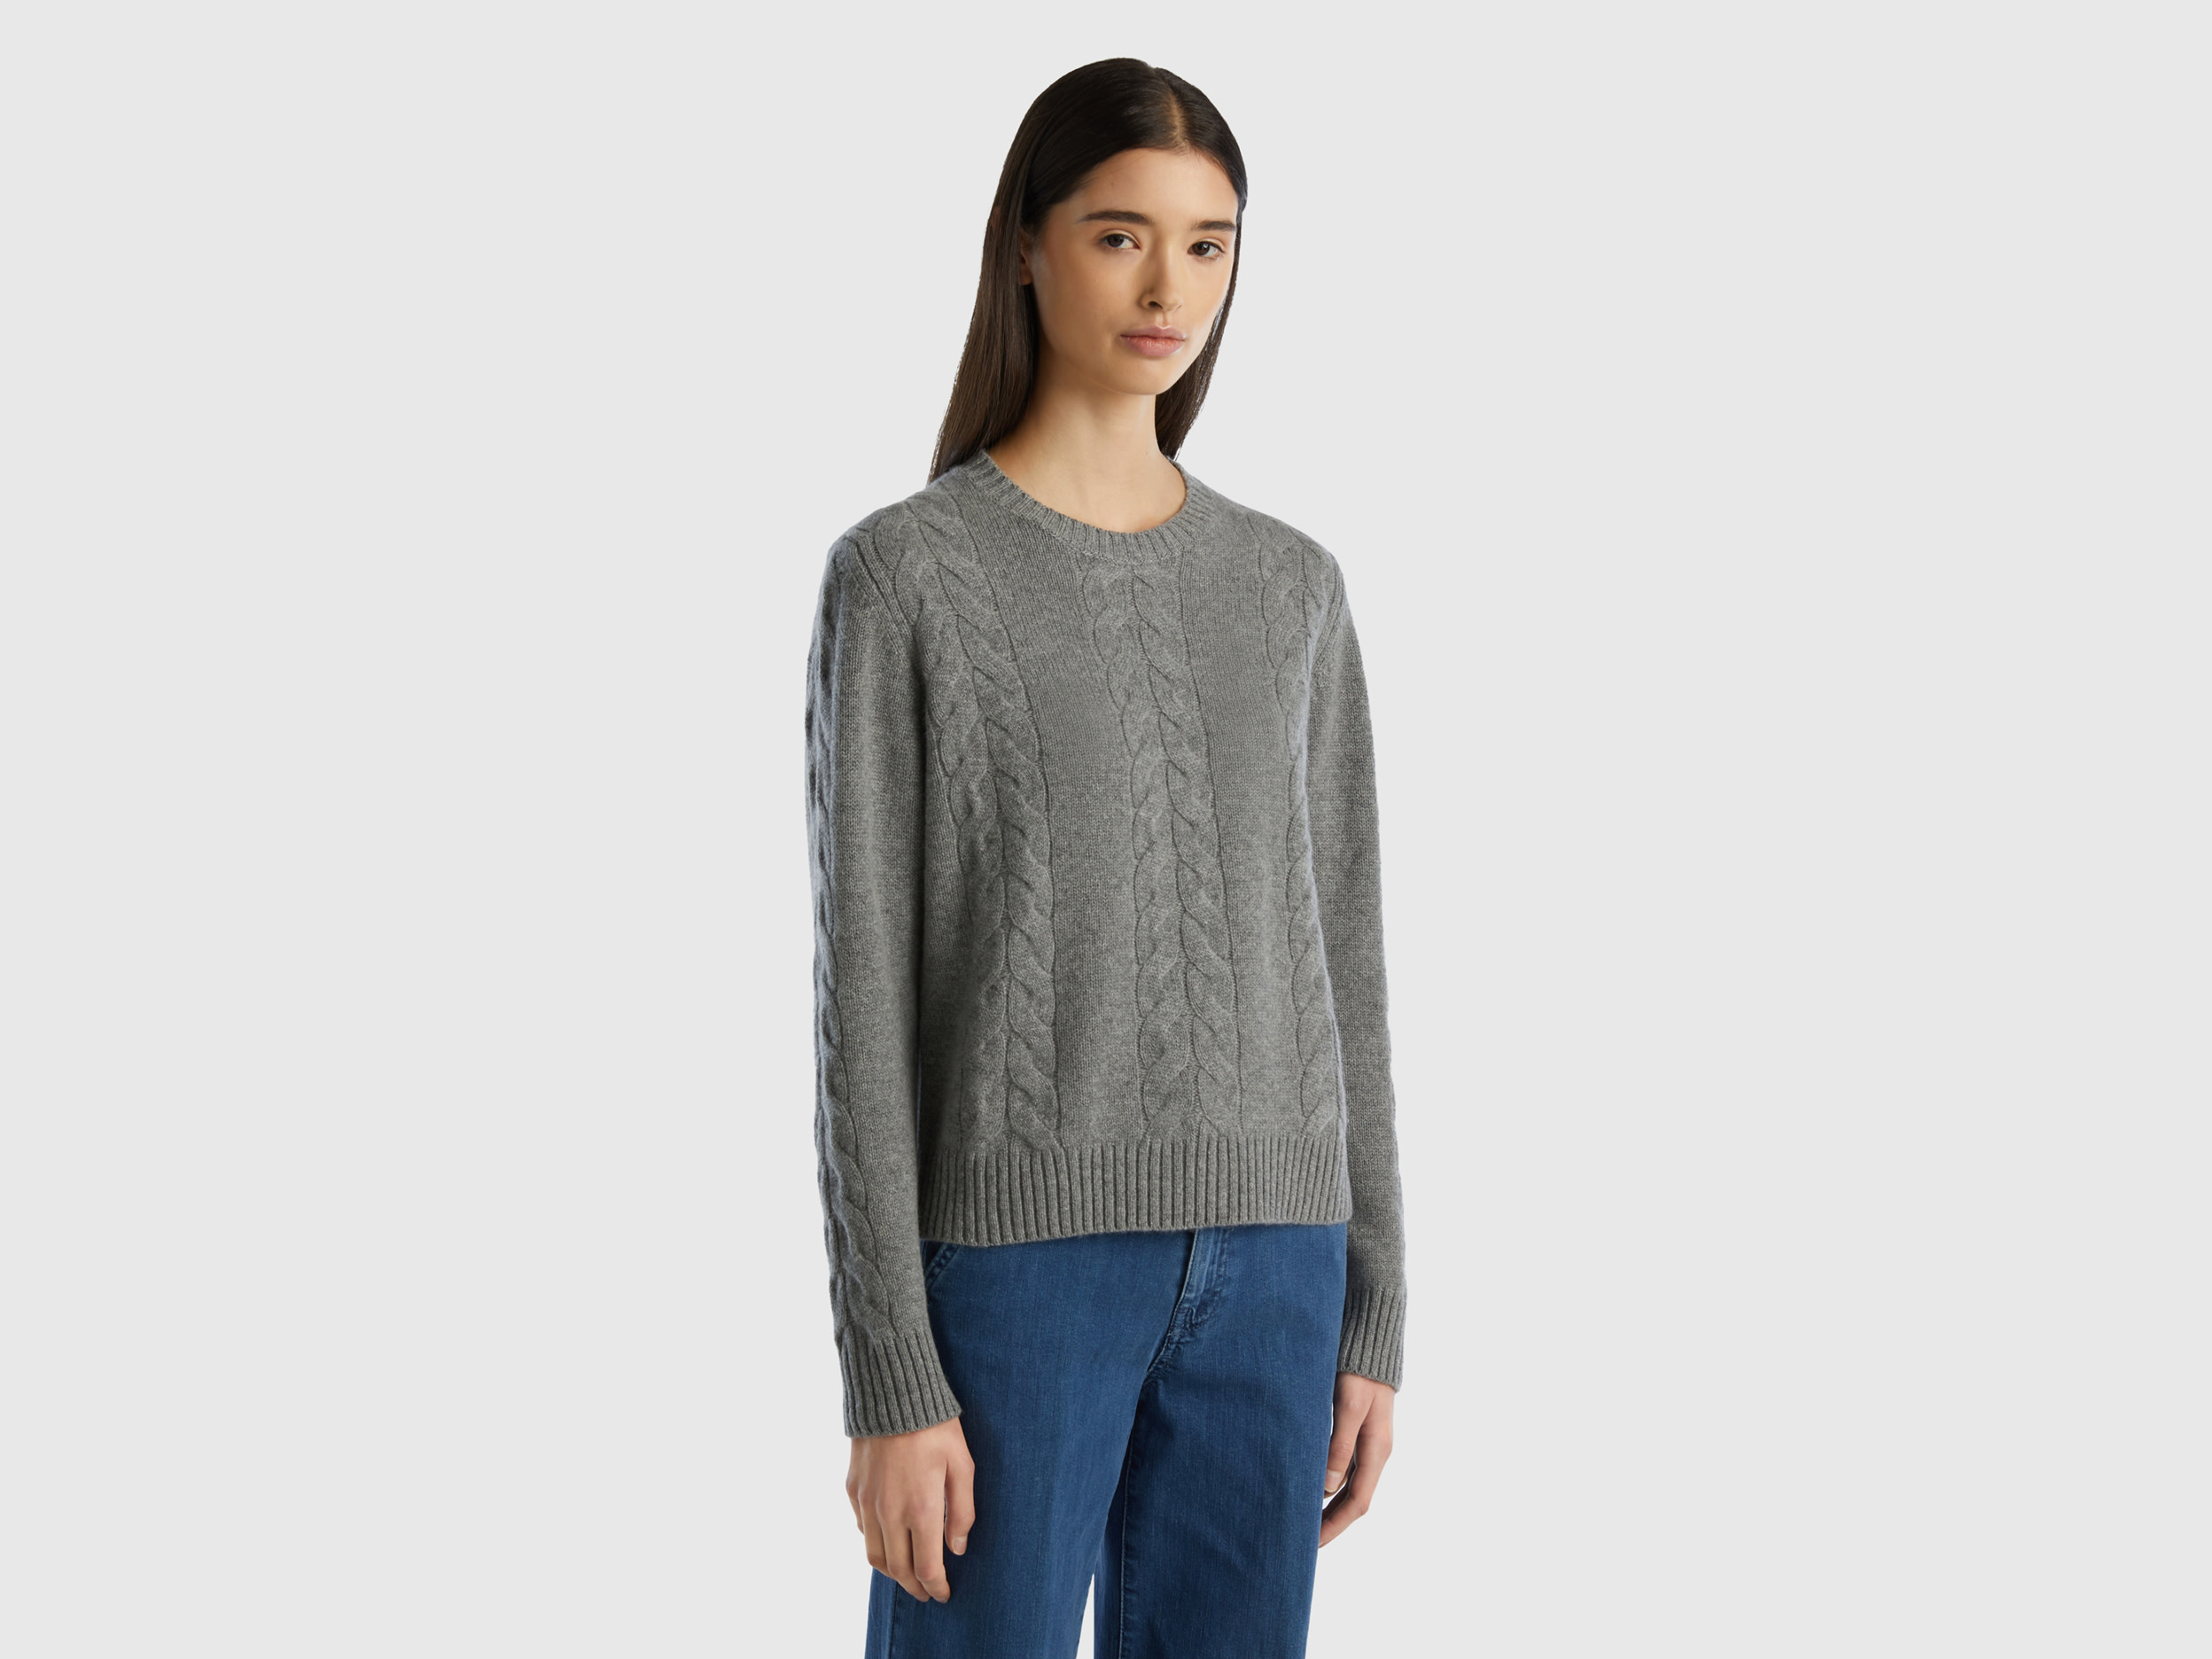 Benetton, Cable Knit Sweater In Pure Cashmere, size L, Dark Gray, Women